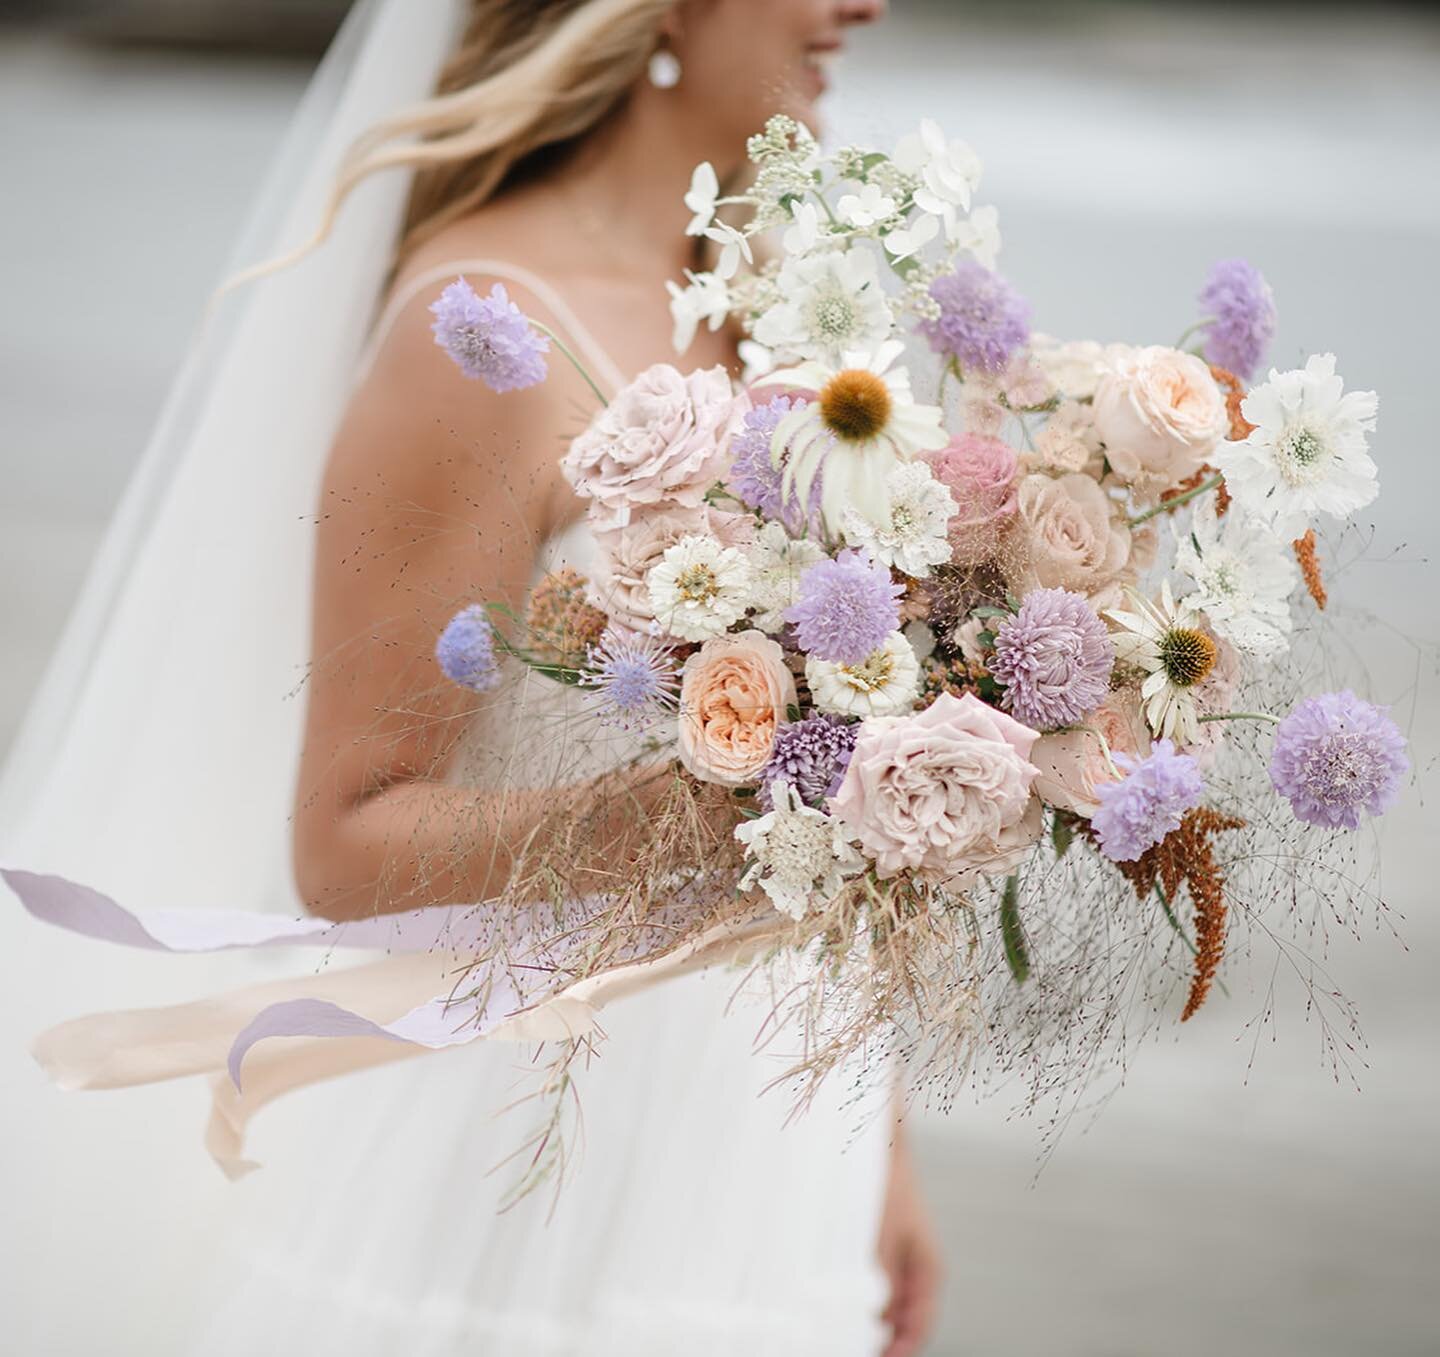 Perfectly documented floral details for T+C. I&rsquo;m a huge fan of mixing bouquets and floral ingredients for your wedding party. Who&rsquo;s with me?&nbsp;

Photography: @erinwallisphotography 
Floral Design: @apothecaryfloral 
Day of Coordinator: